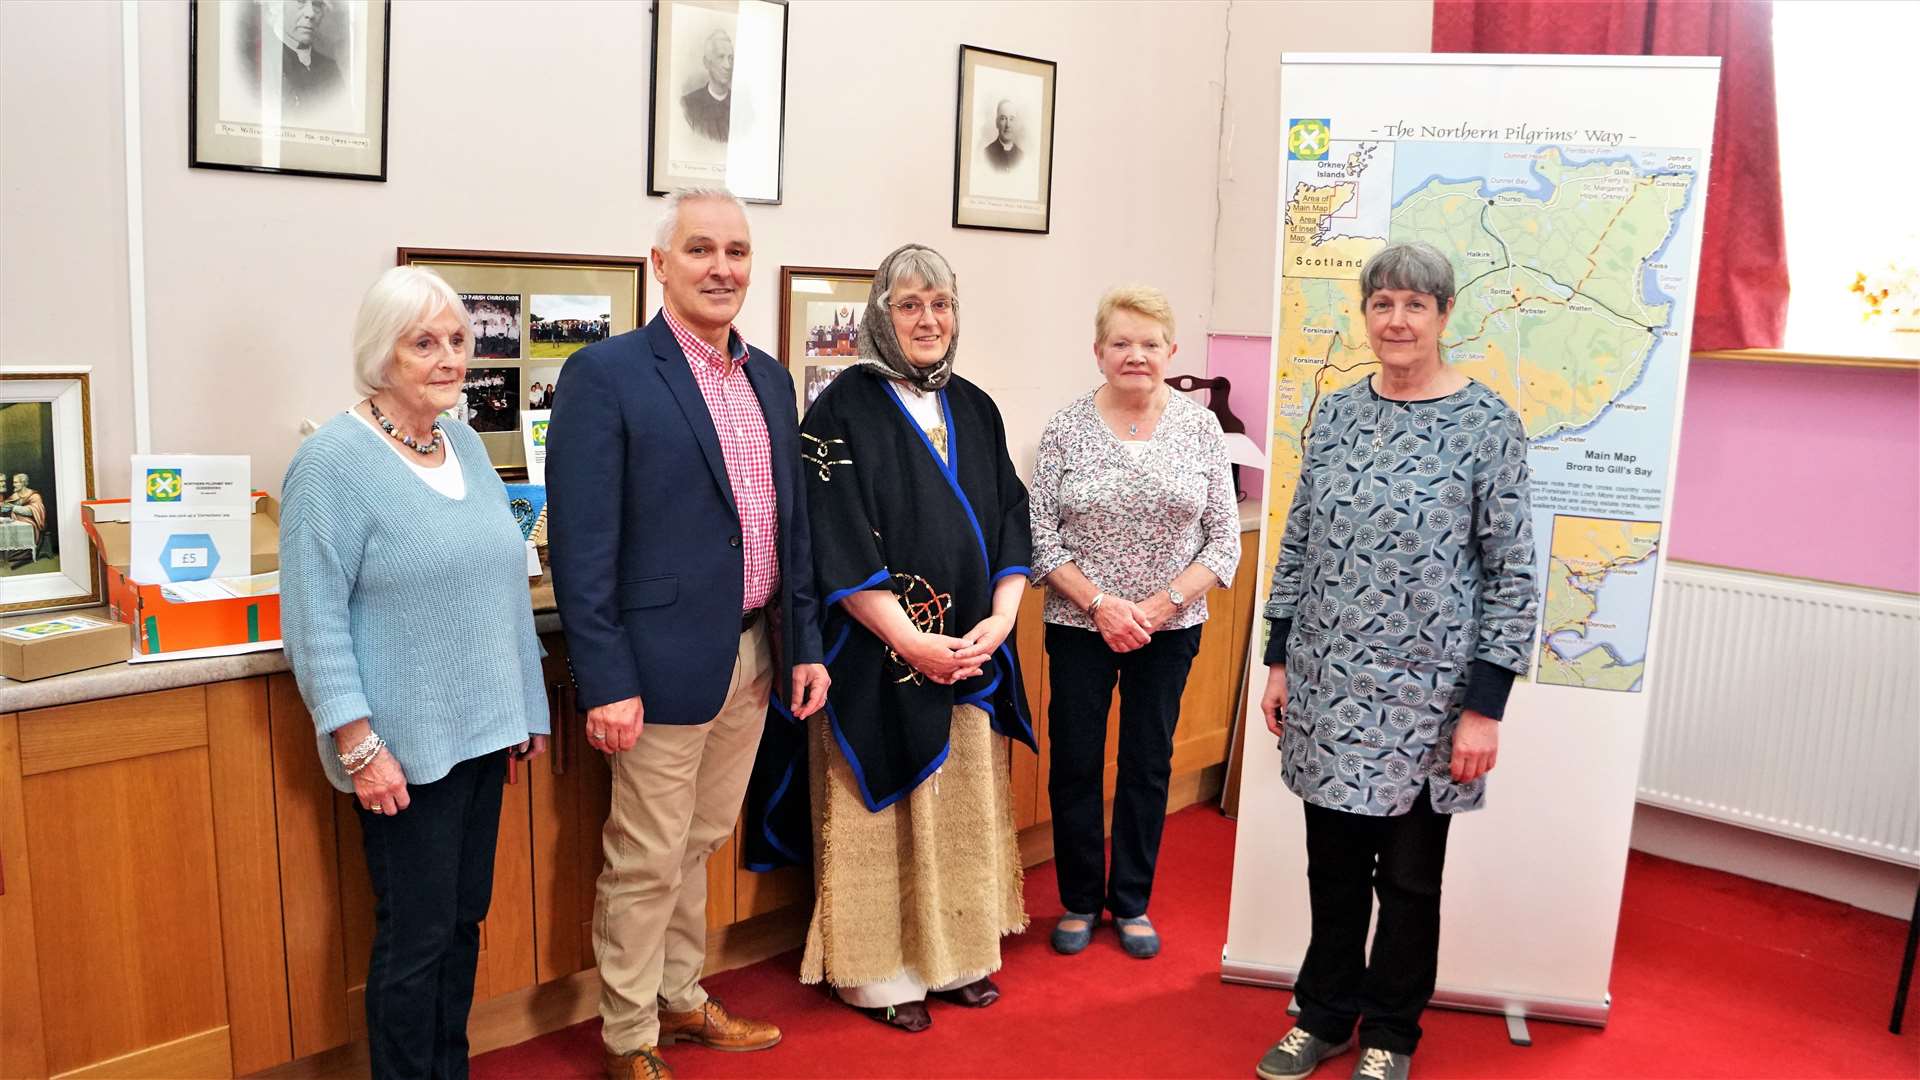 From left, Barbara van Rooyen, Karl Rosie, Jane Coll, Margaret Jennings, and Fiona Mitchell. Picture: DGS